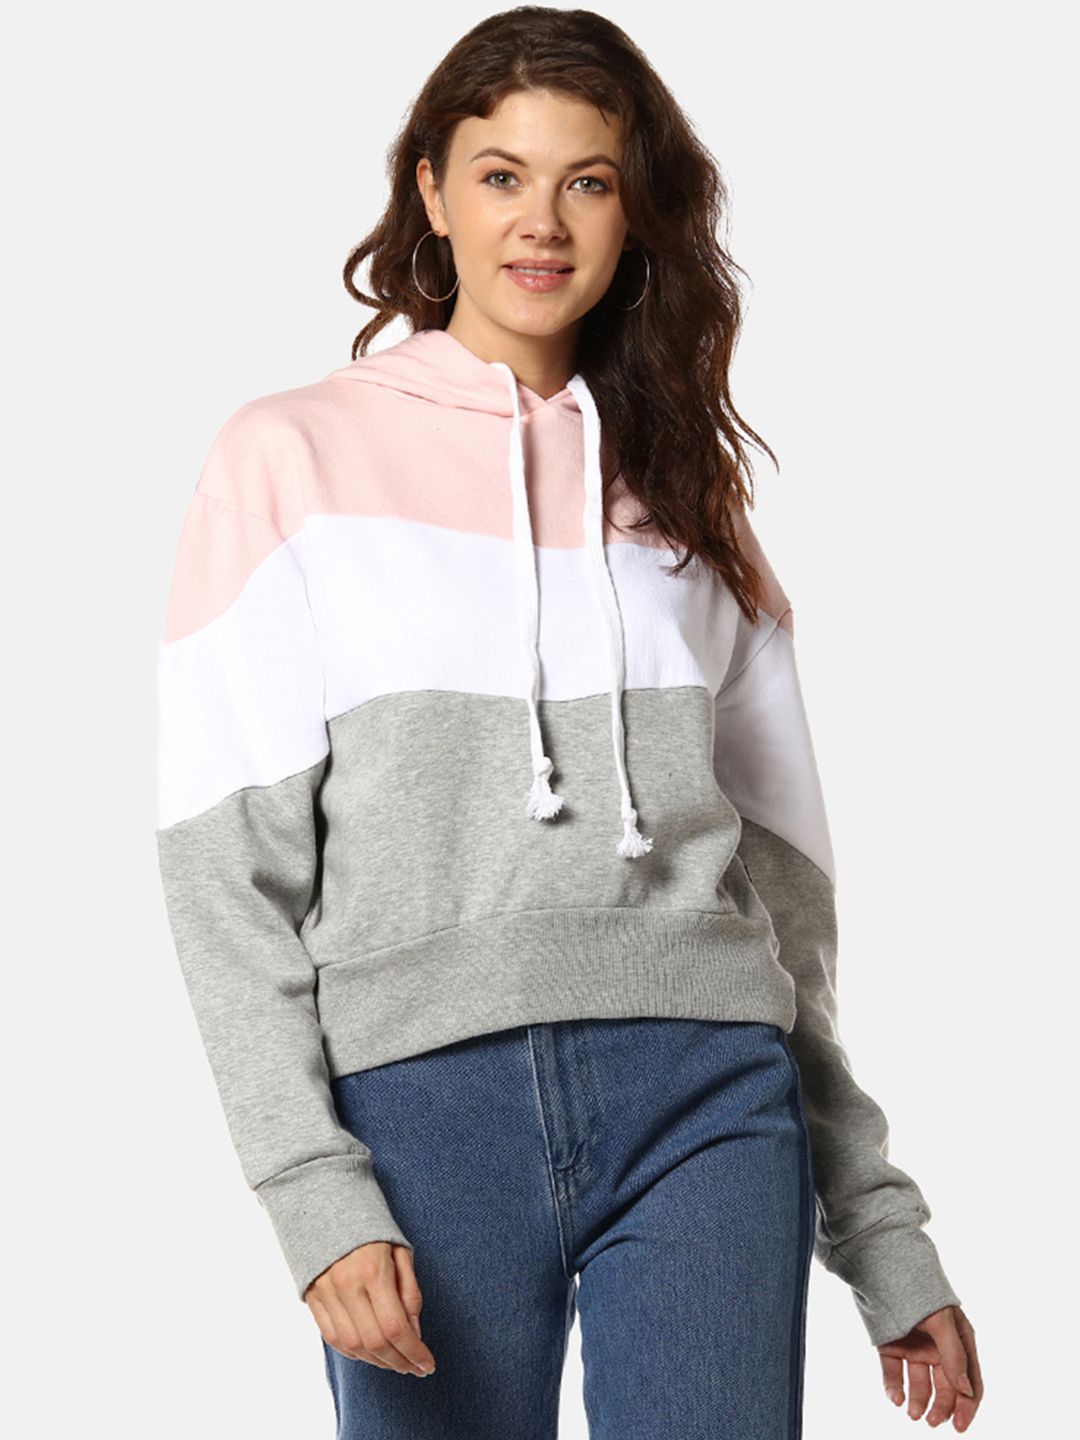 Campus Sutra Women Grey & White Colourblocked Hooded Sweatshirt Price in India